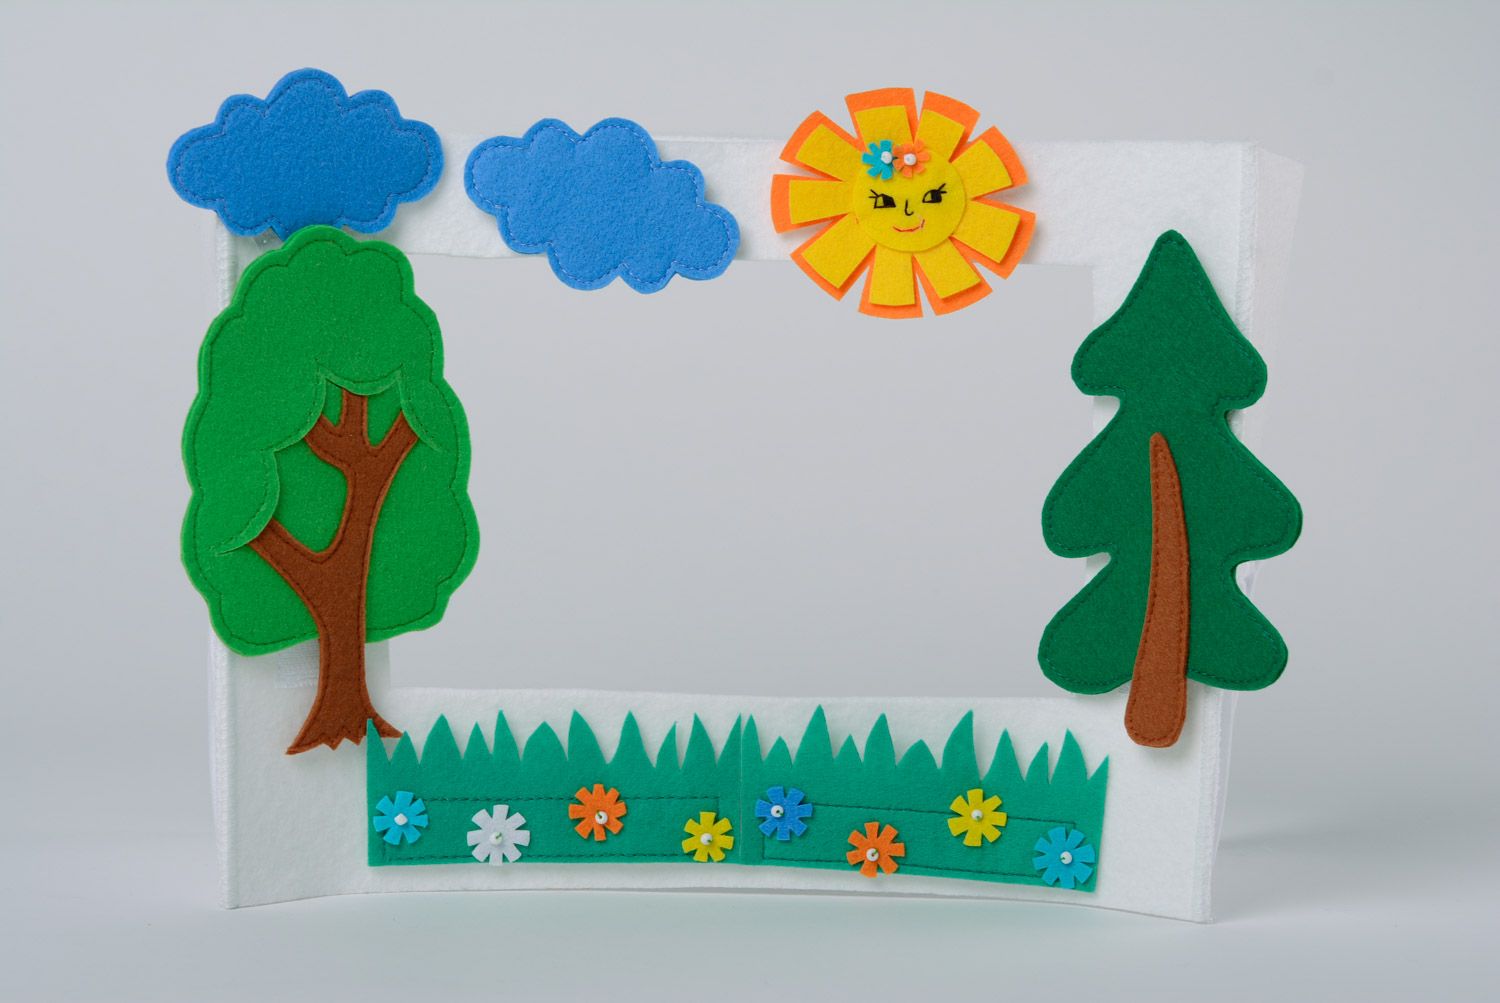 Handmade multi-colored desktop felt puppet theater with folding screen and scenery photo 2